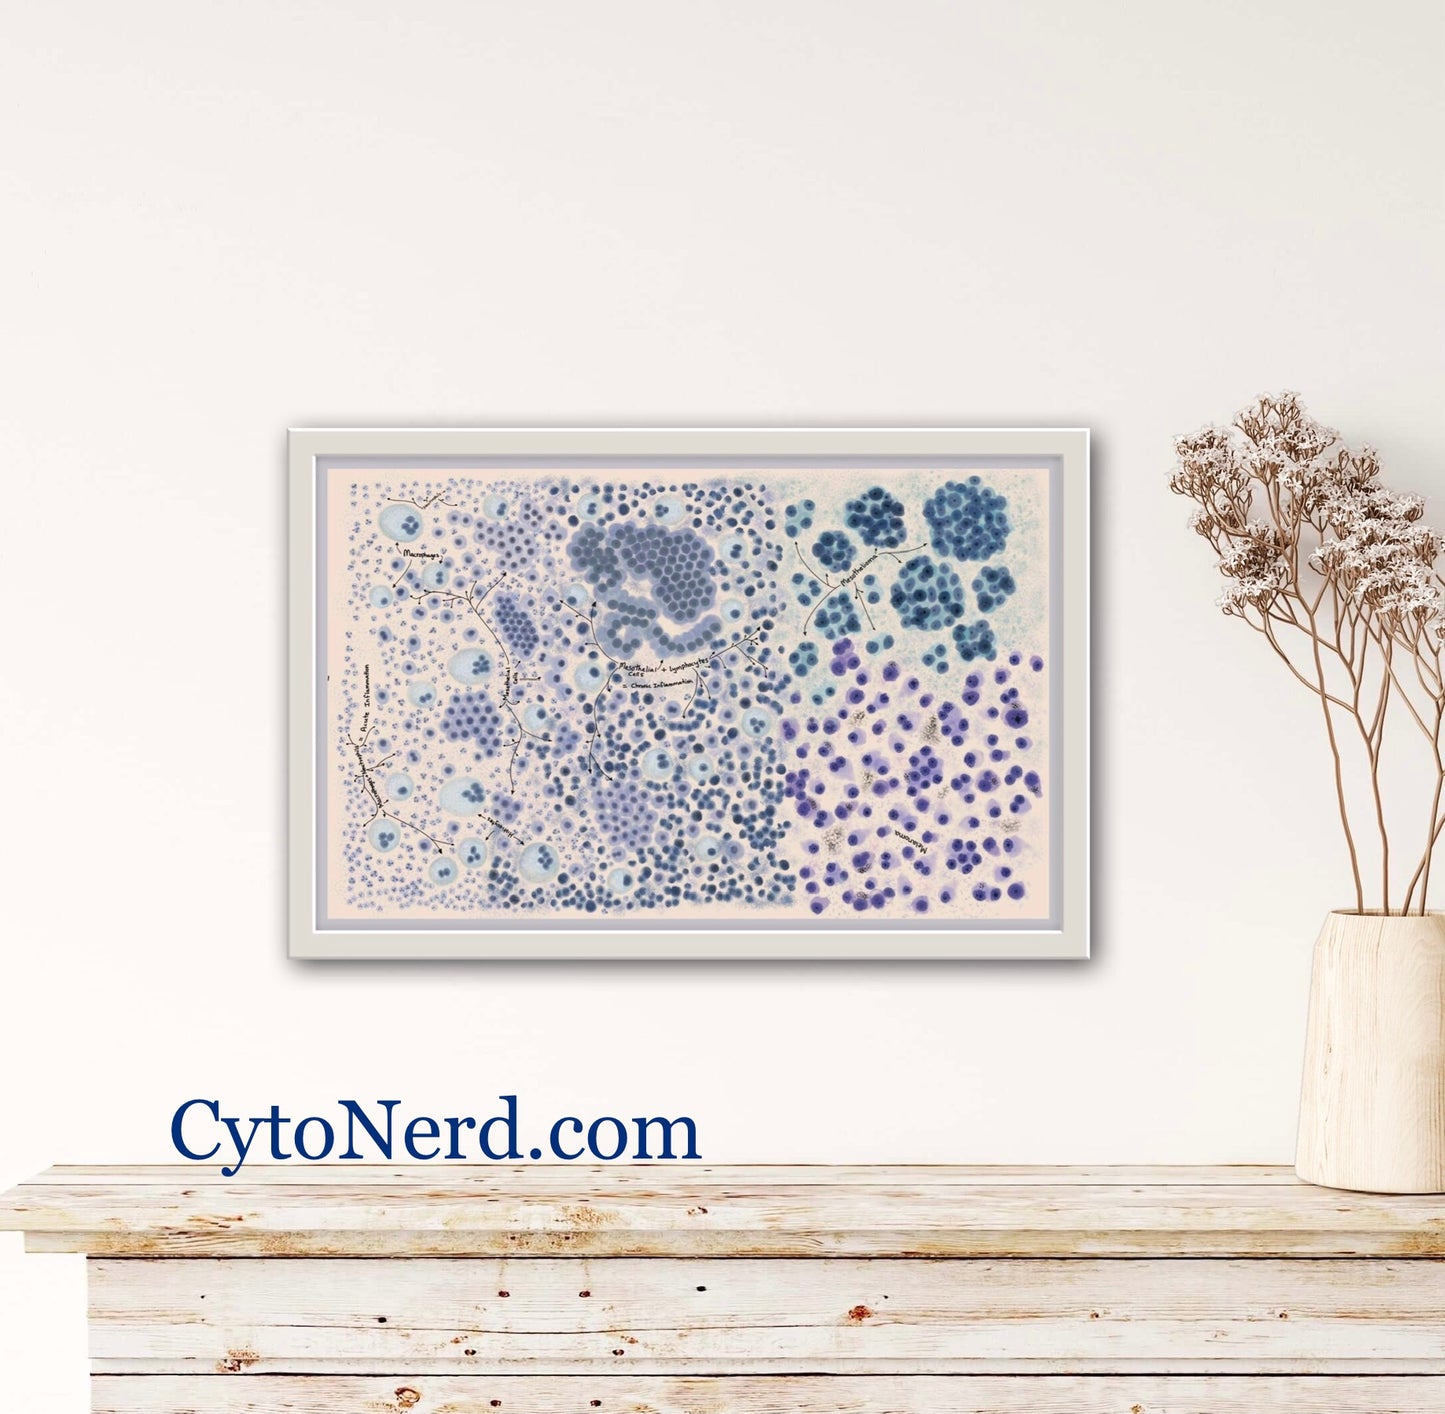 Mesothelial cells, body fluid Poster, Adenocarcinoma Cells art print, cancer colorful Cytology cells, carcinoma